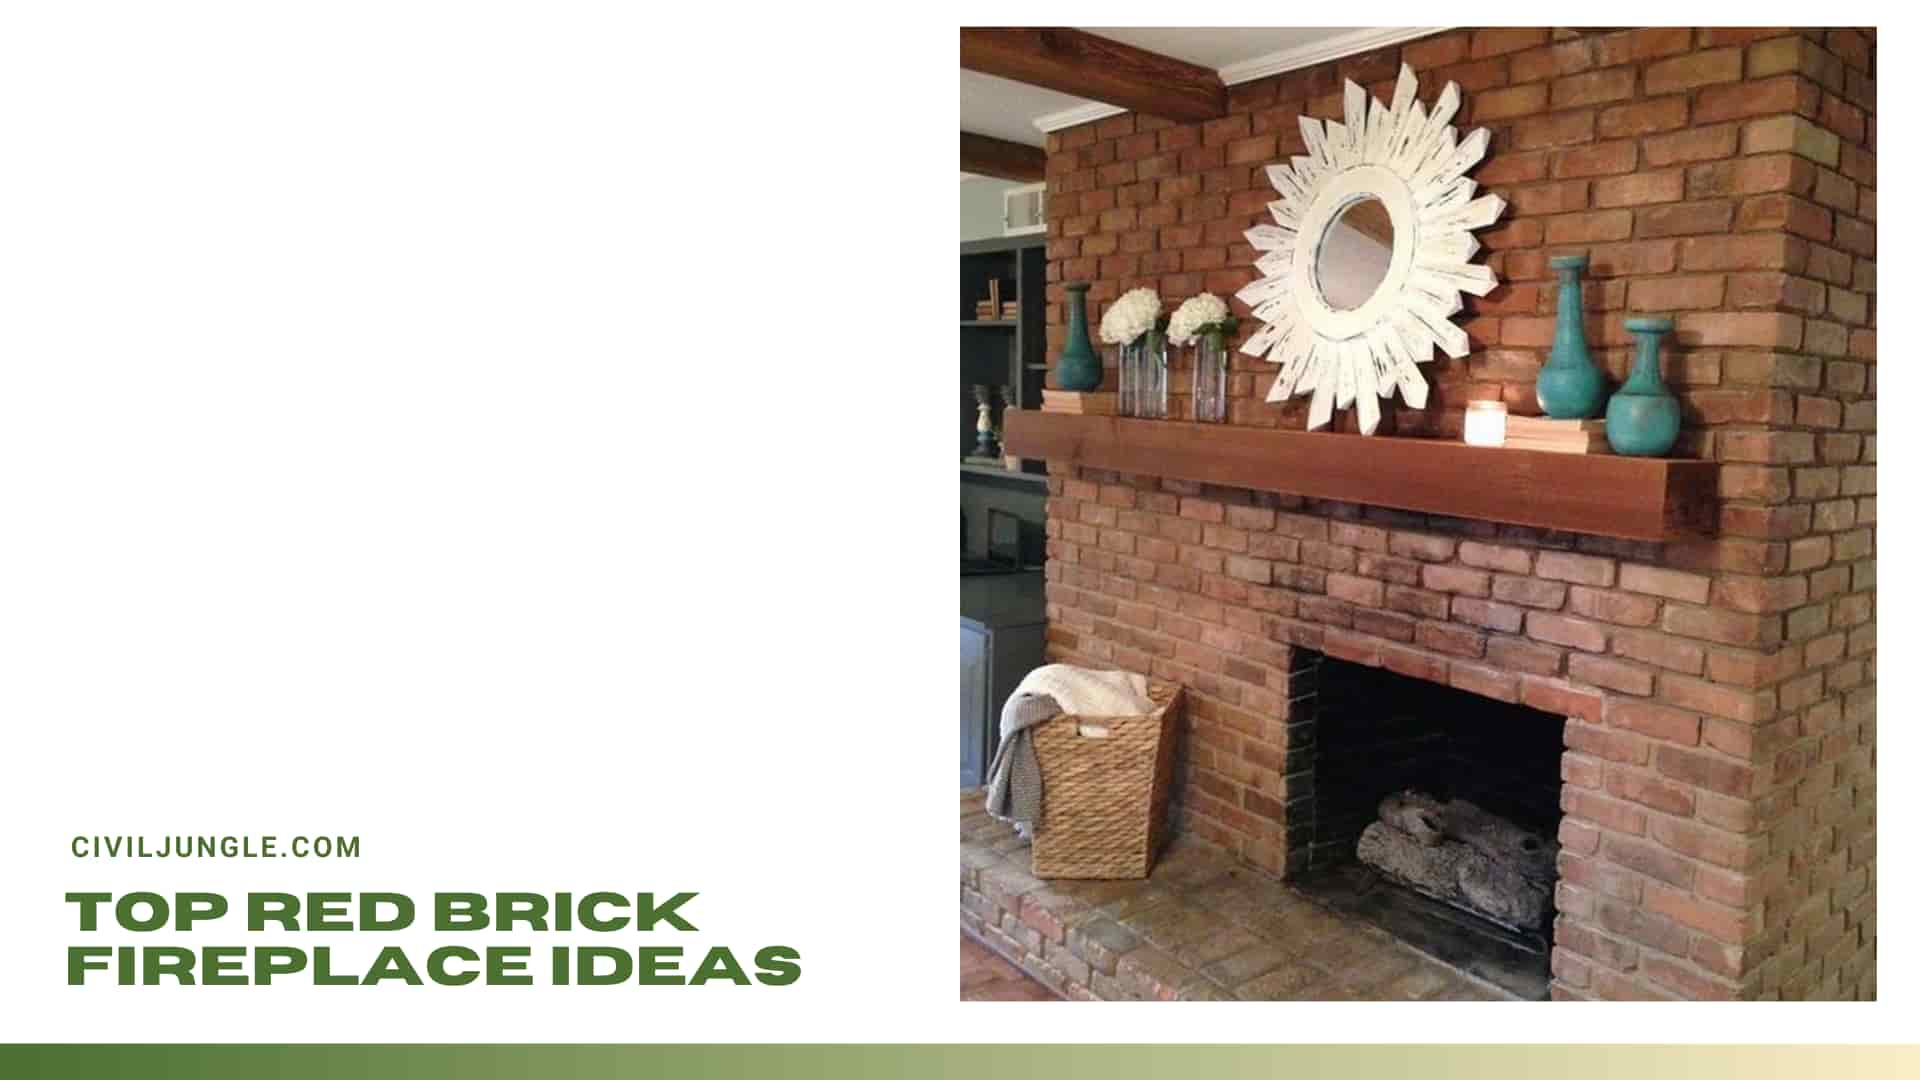 Top Red Brick Fireplace Ideas